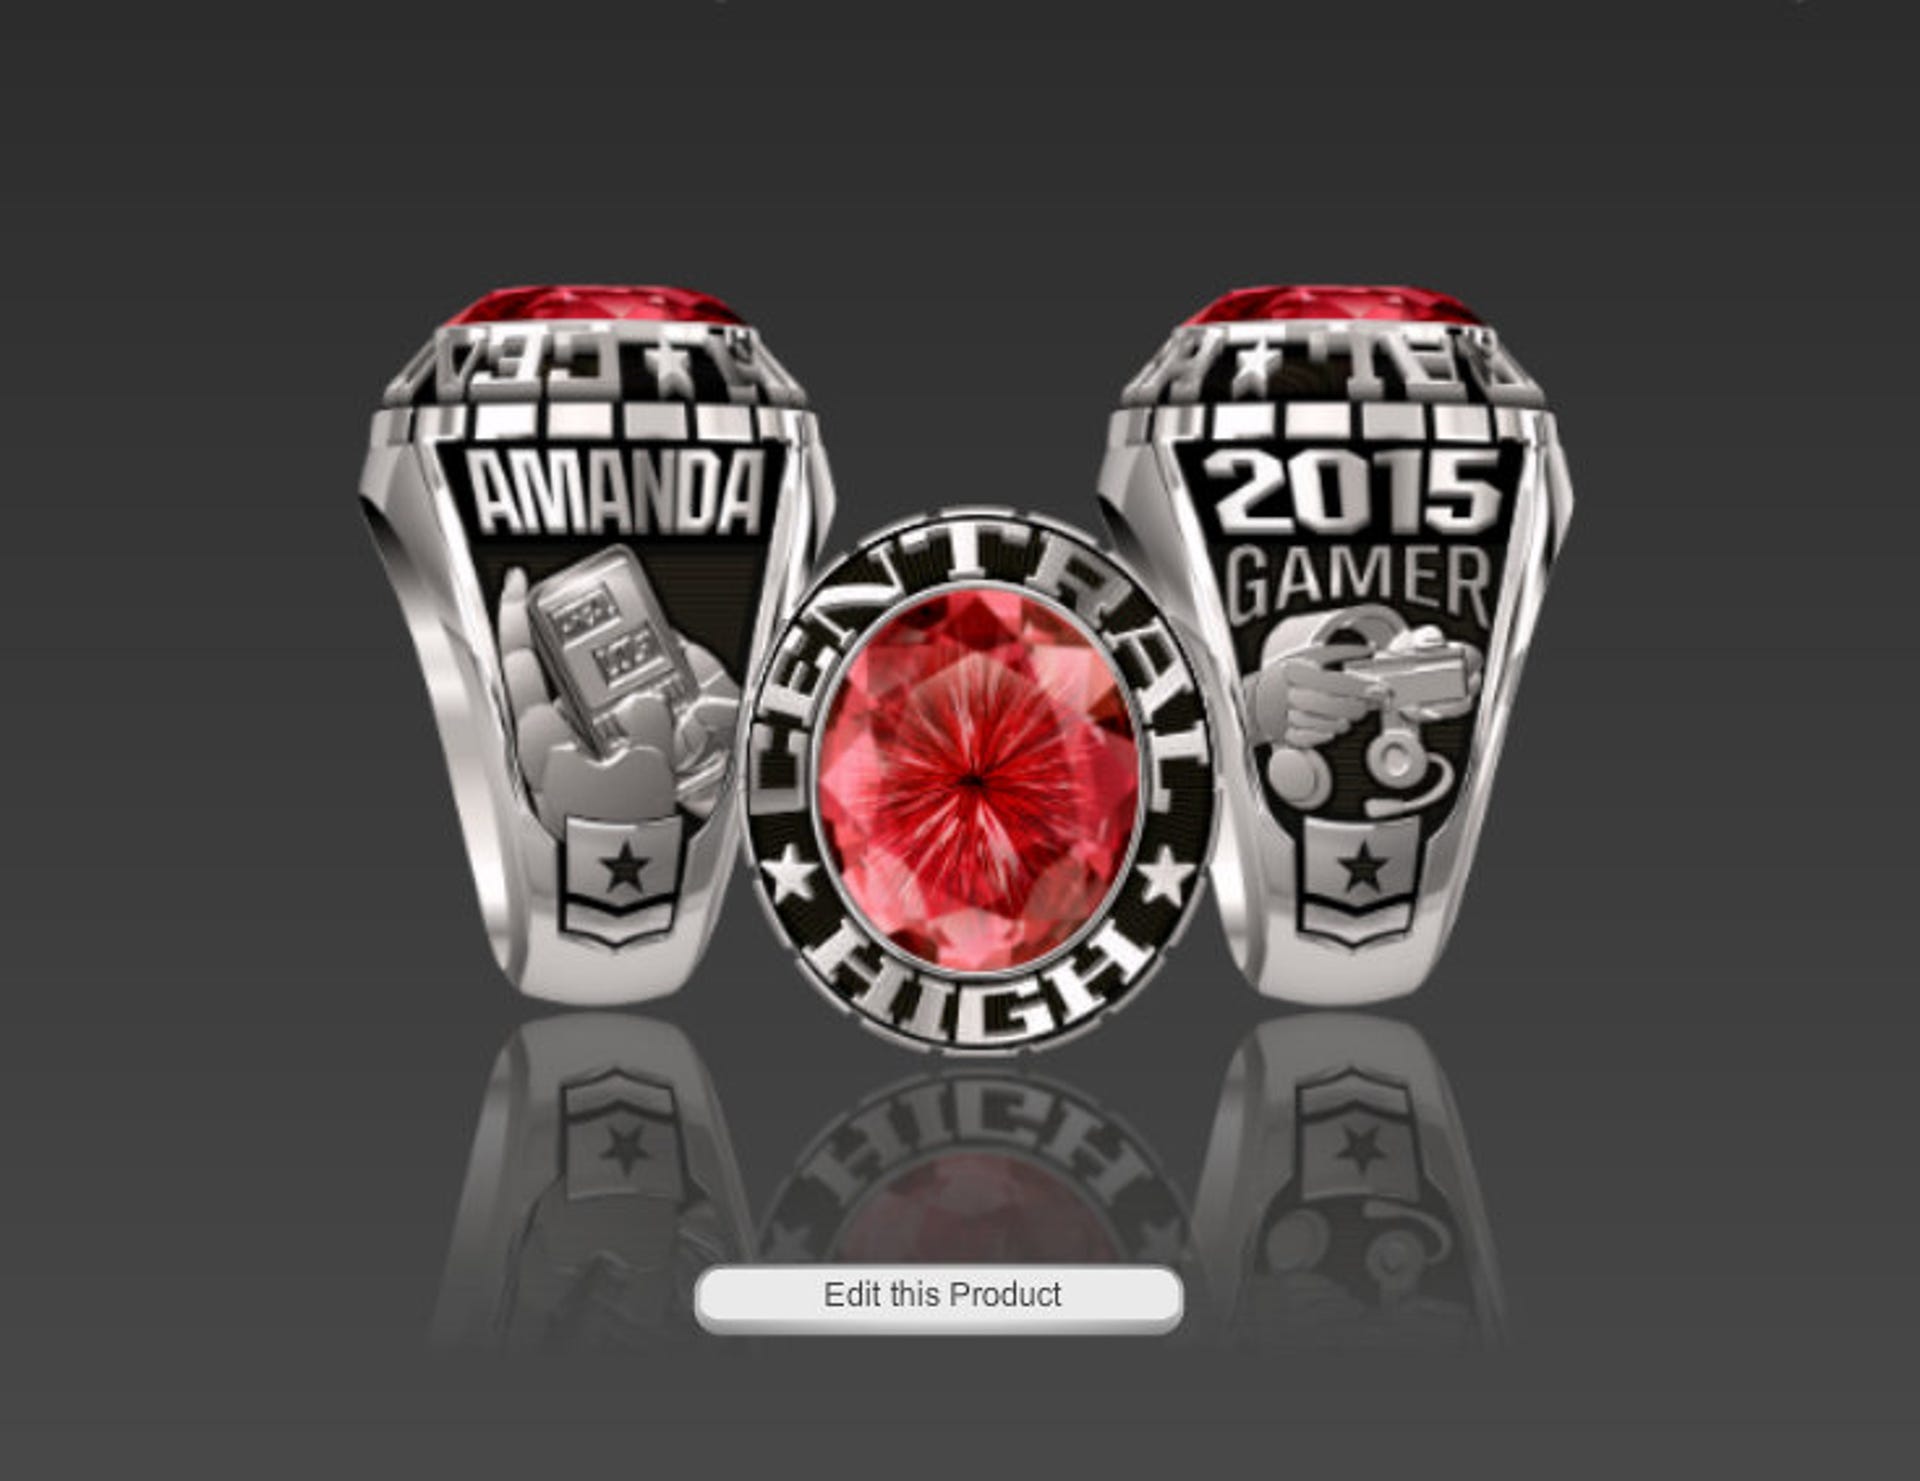 Texting and gaming class ring